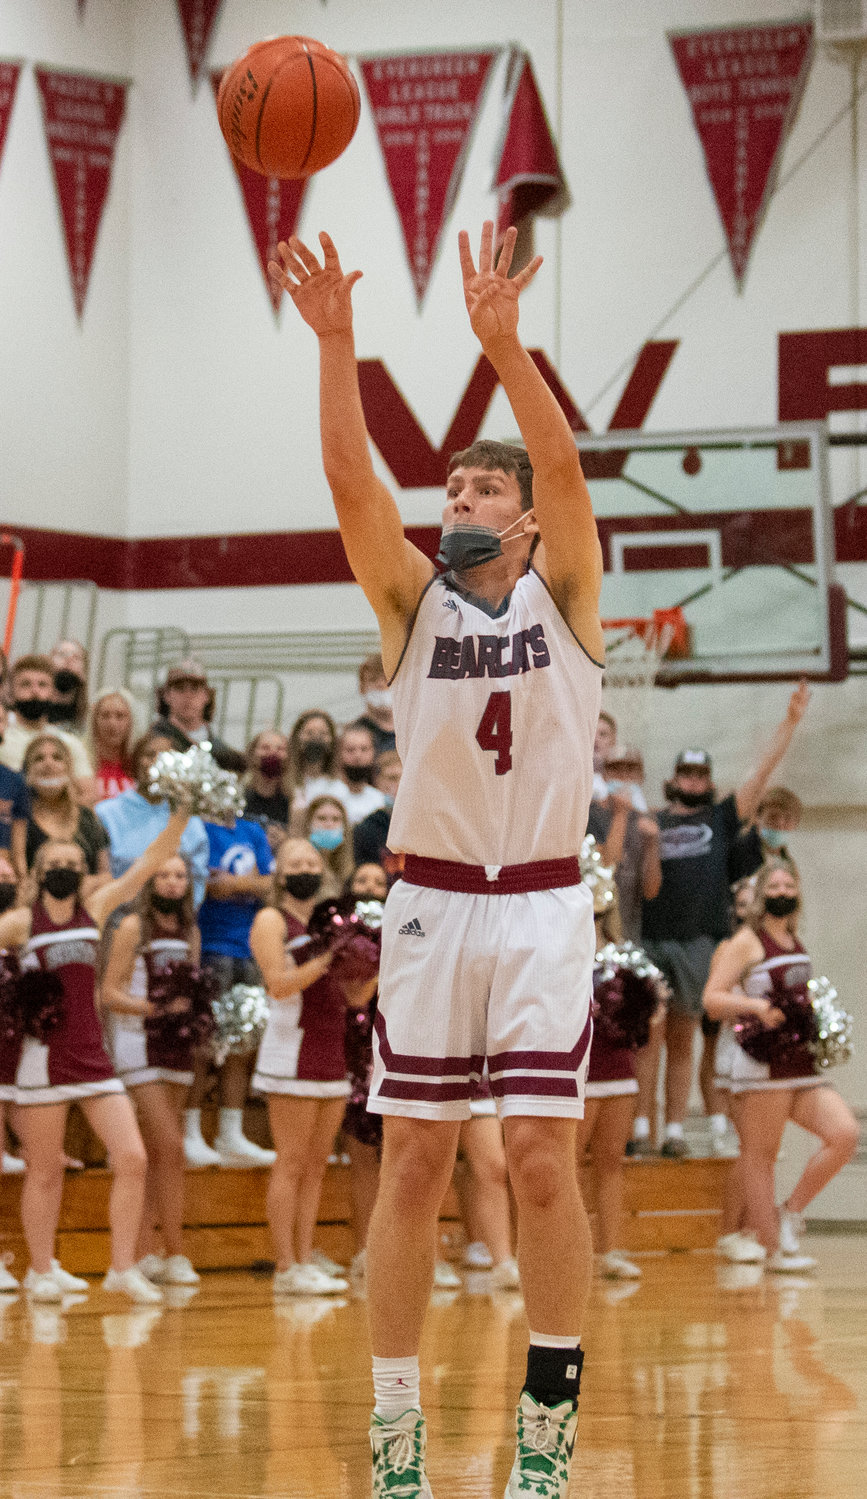 W.F. West senior Cade Haller shoots a wide-open 3-pointer against Shelton on Tuesday.